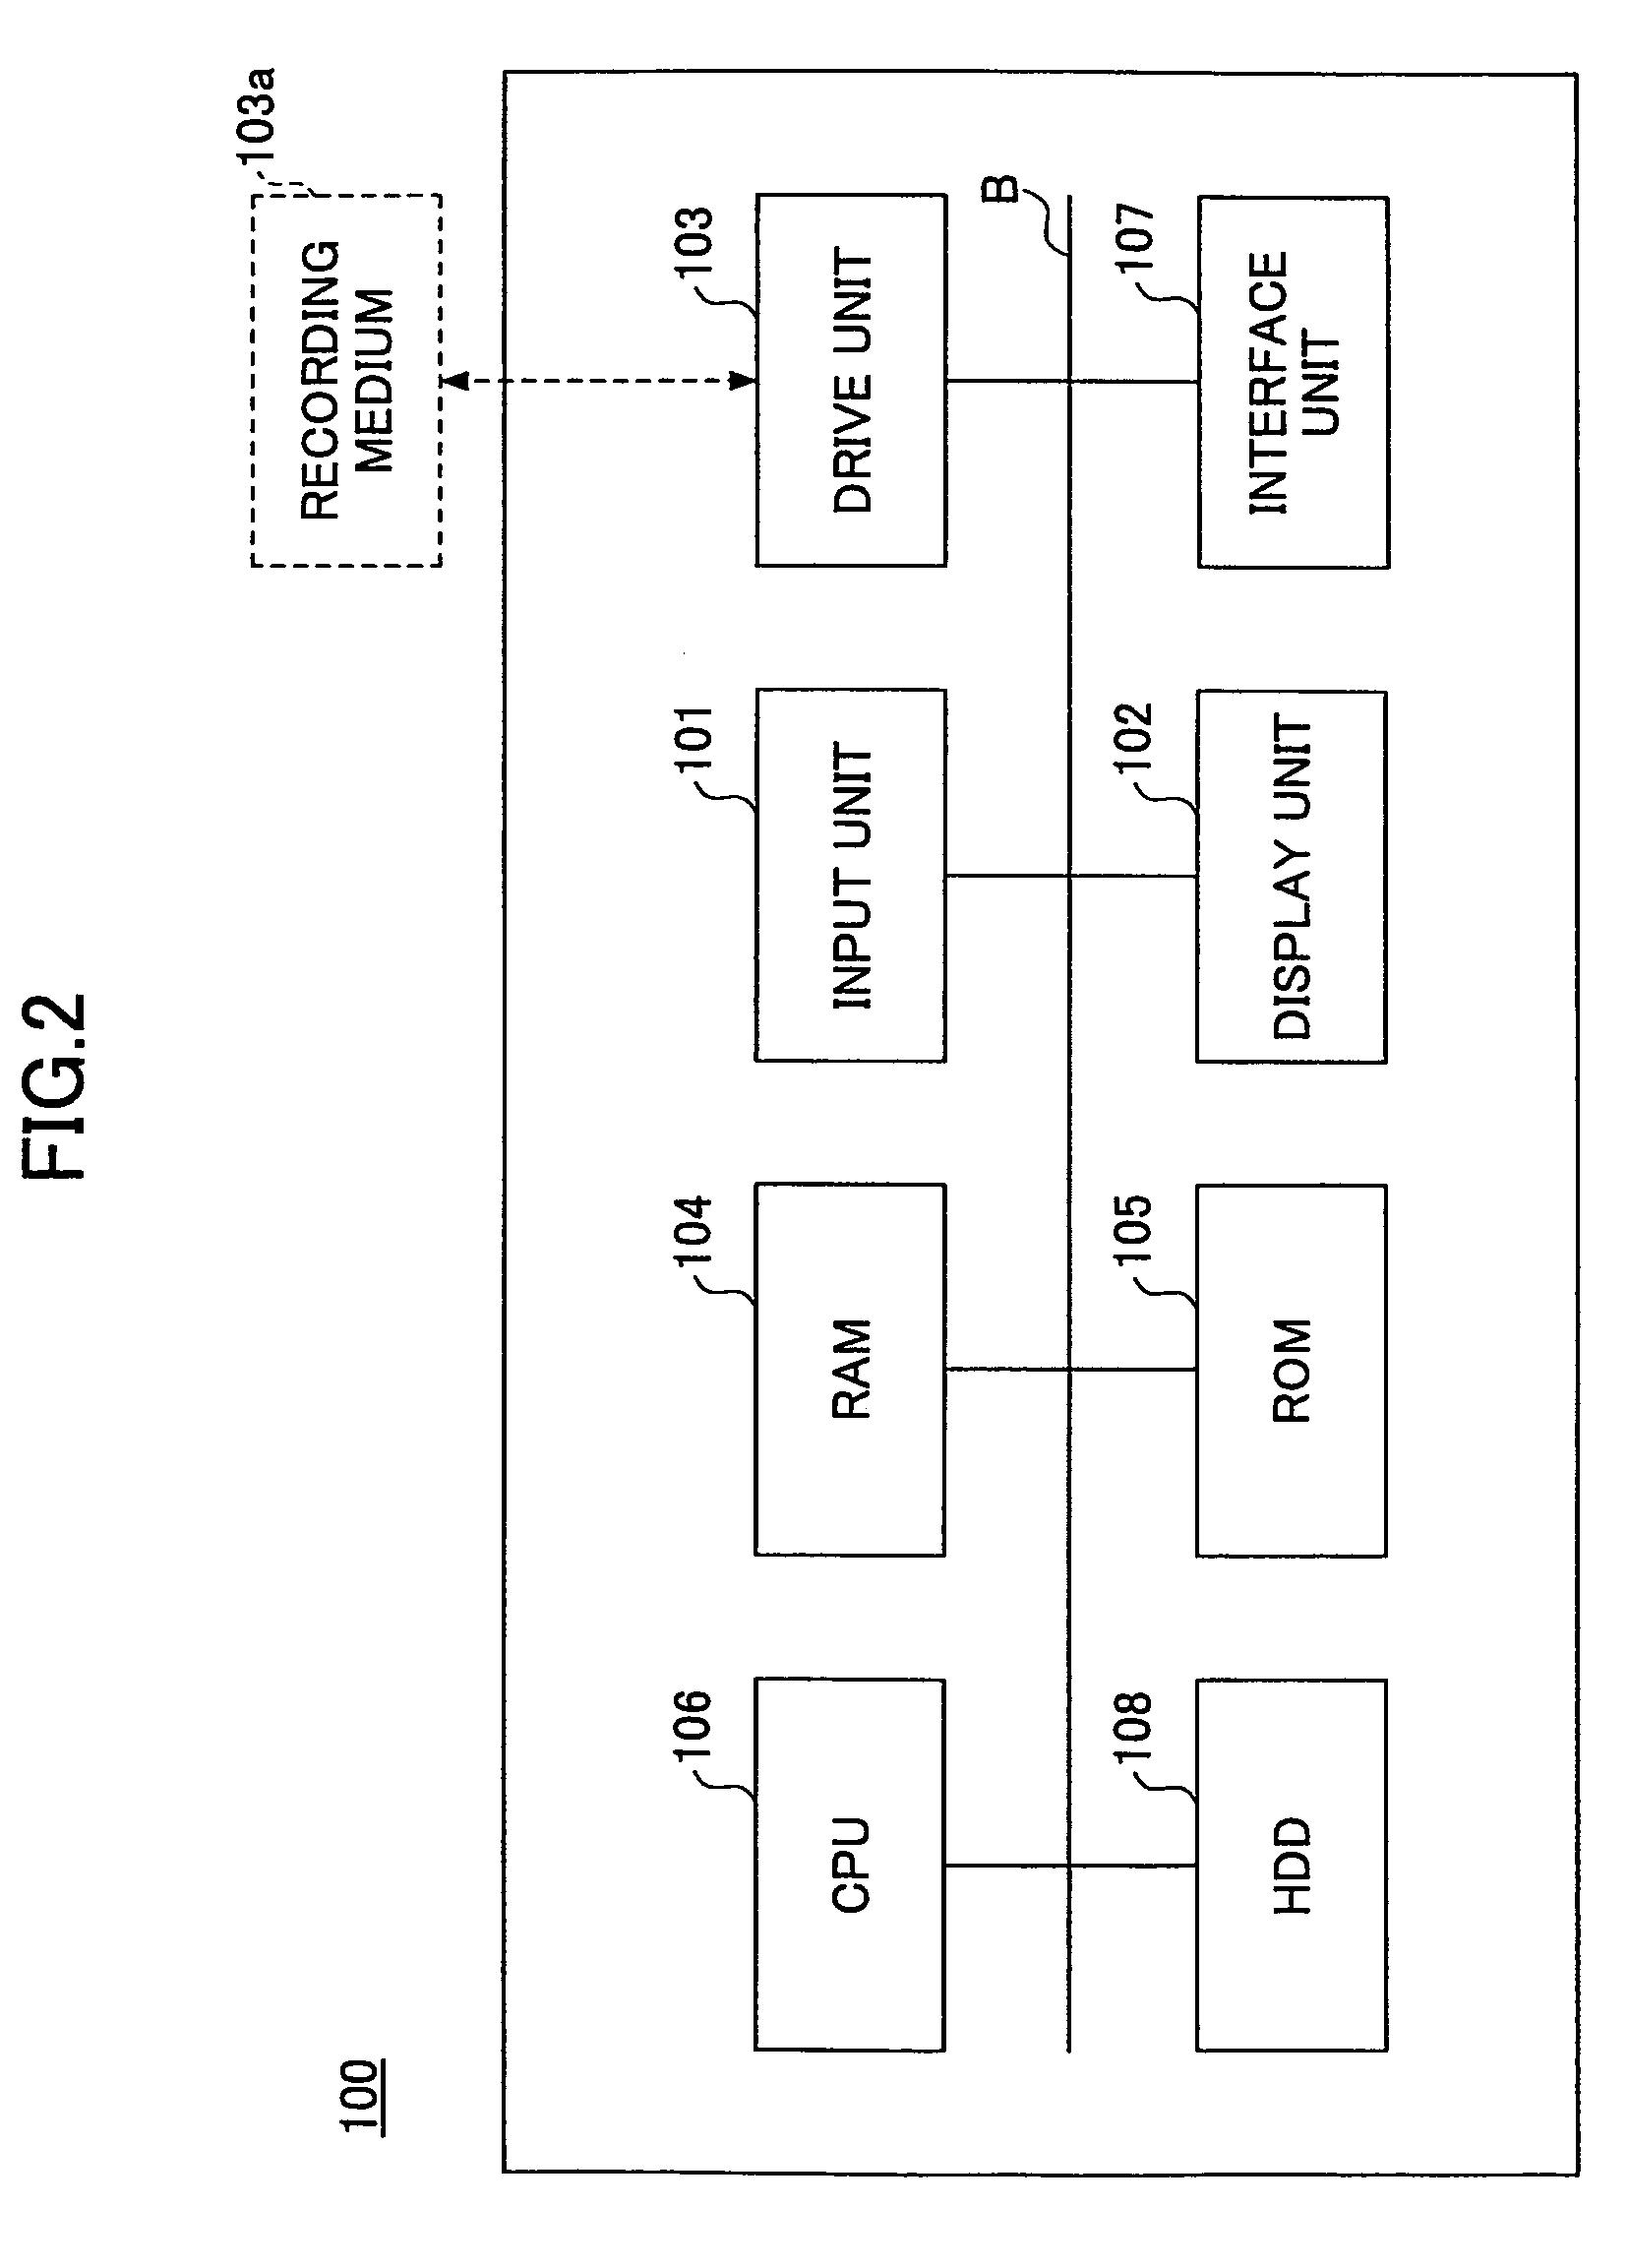 Device management apparatus, device management system, information management method, information management program and recording medium storing the program therein